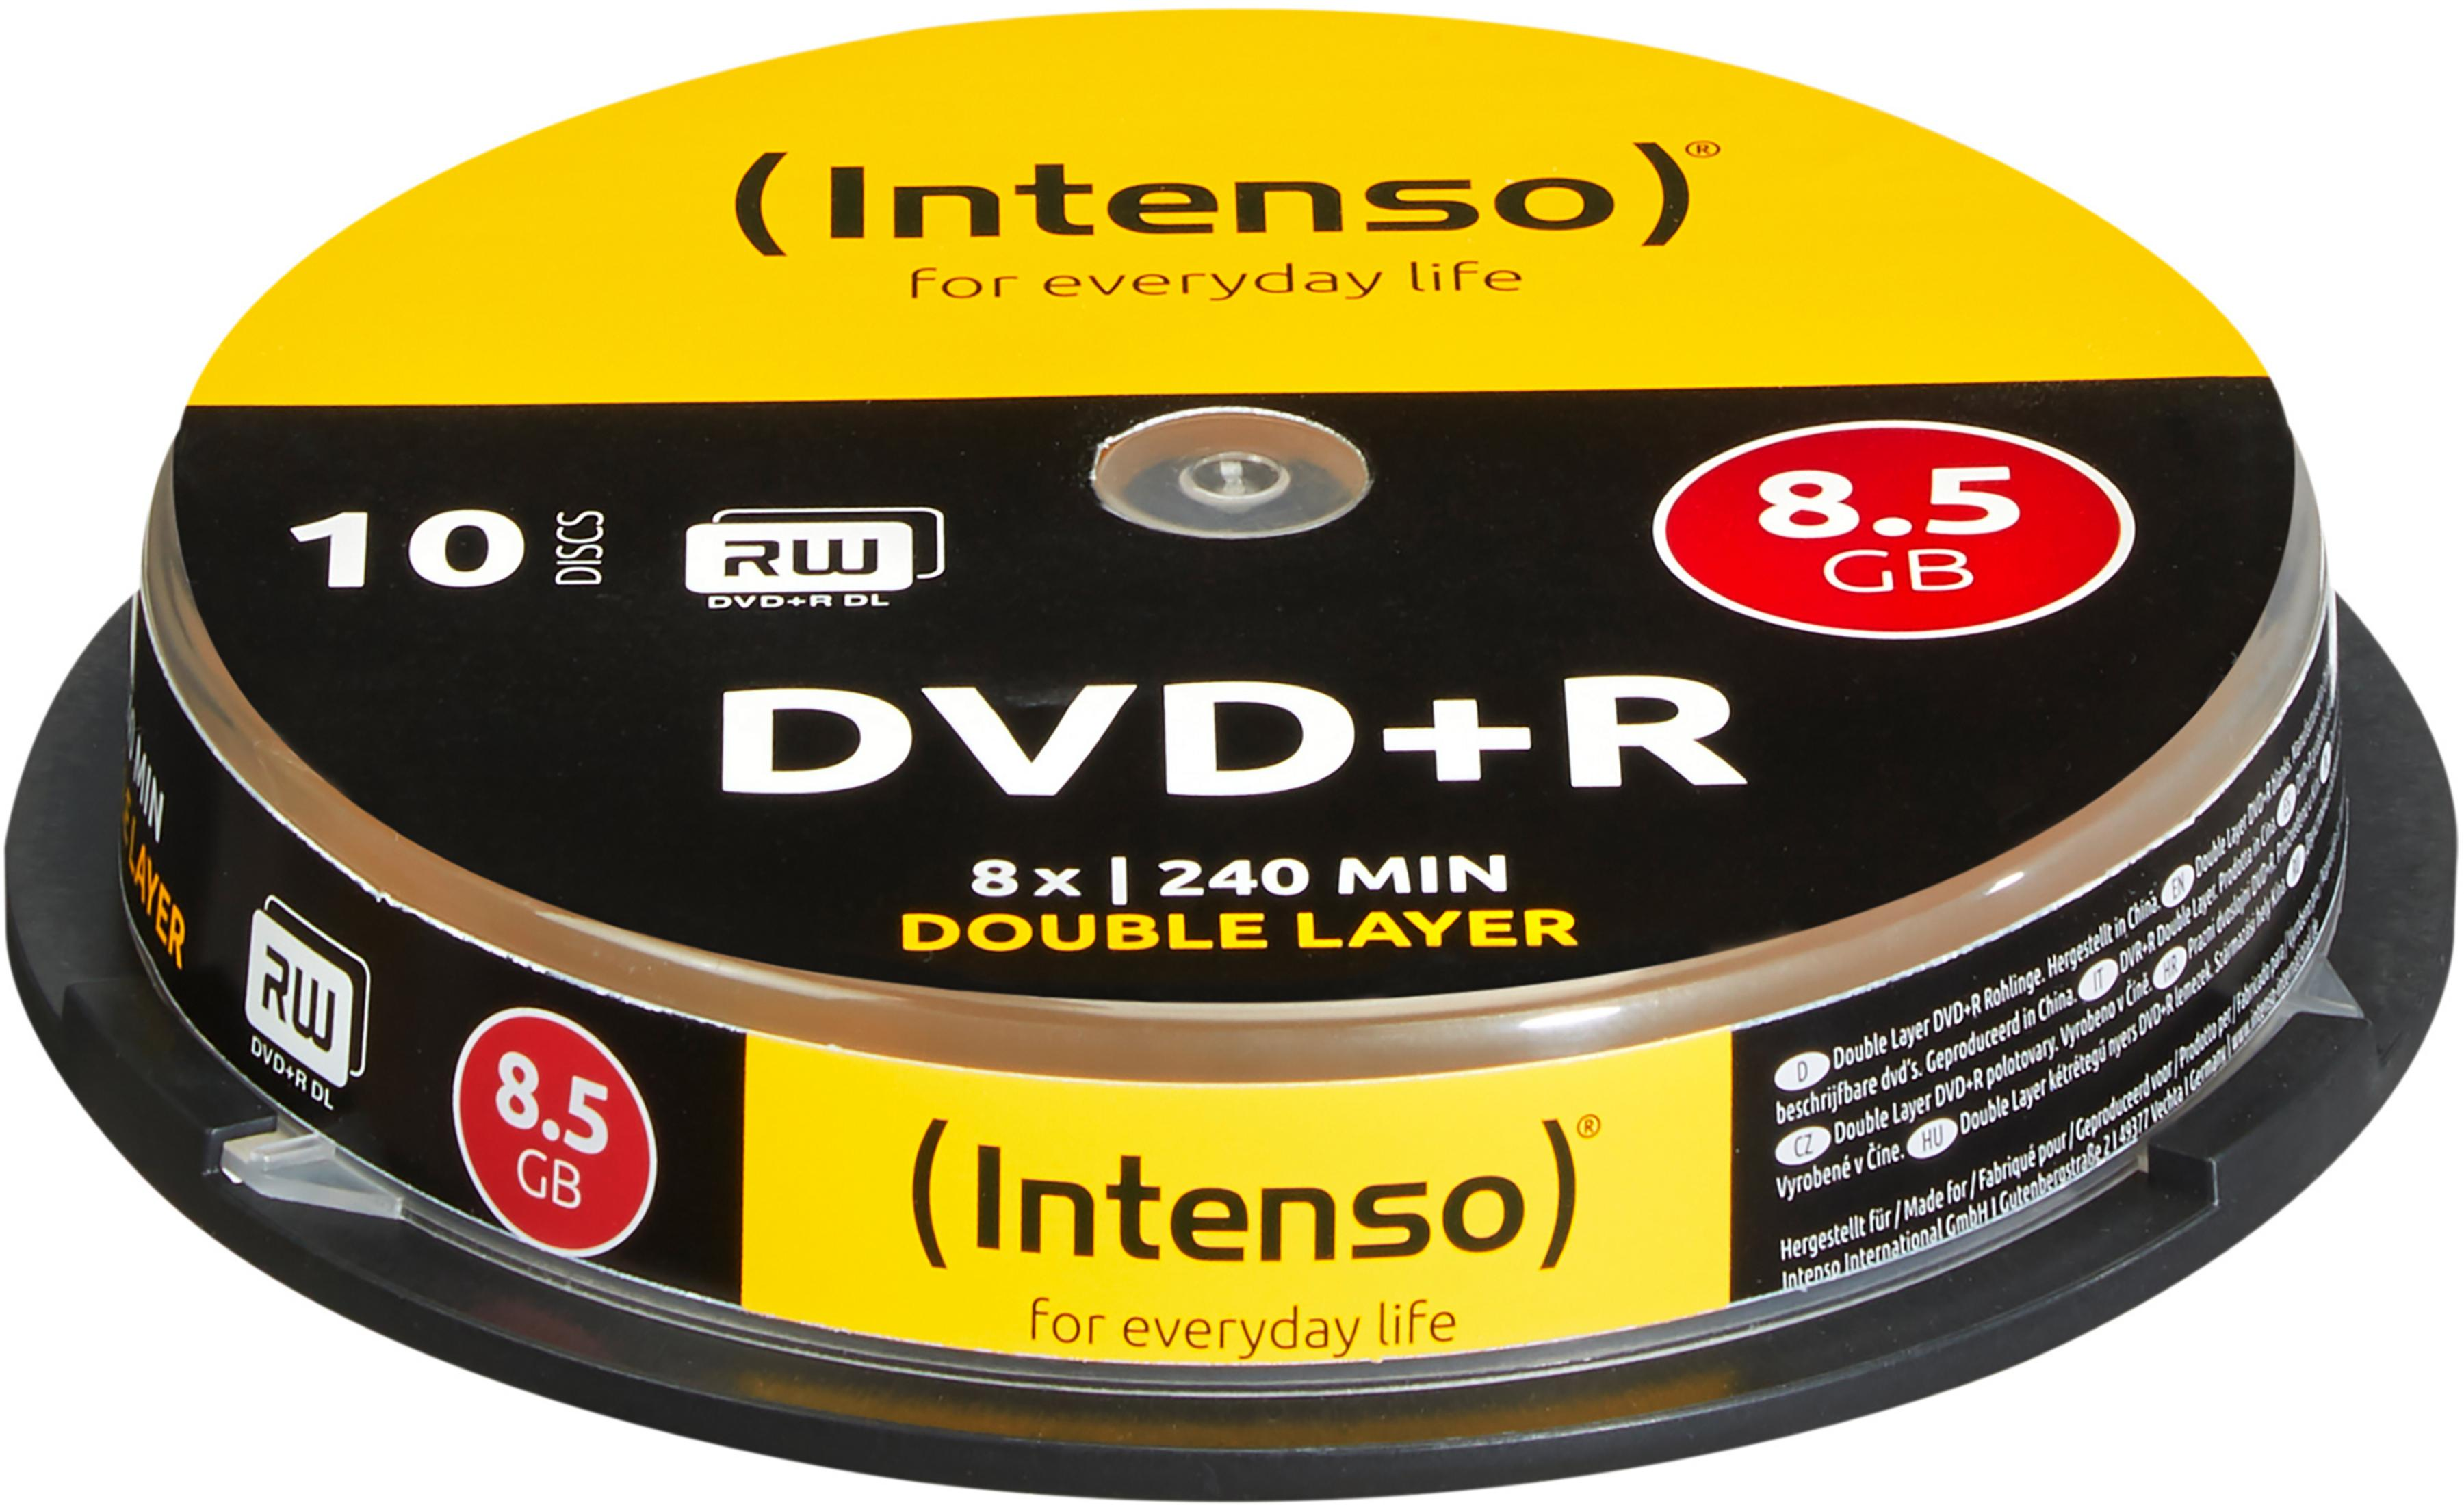 DL 8X DVD+R Layer INTENSO 4311142 CB Double DVD+R 10ER Rohlinge